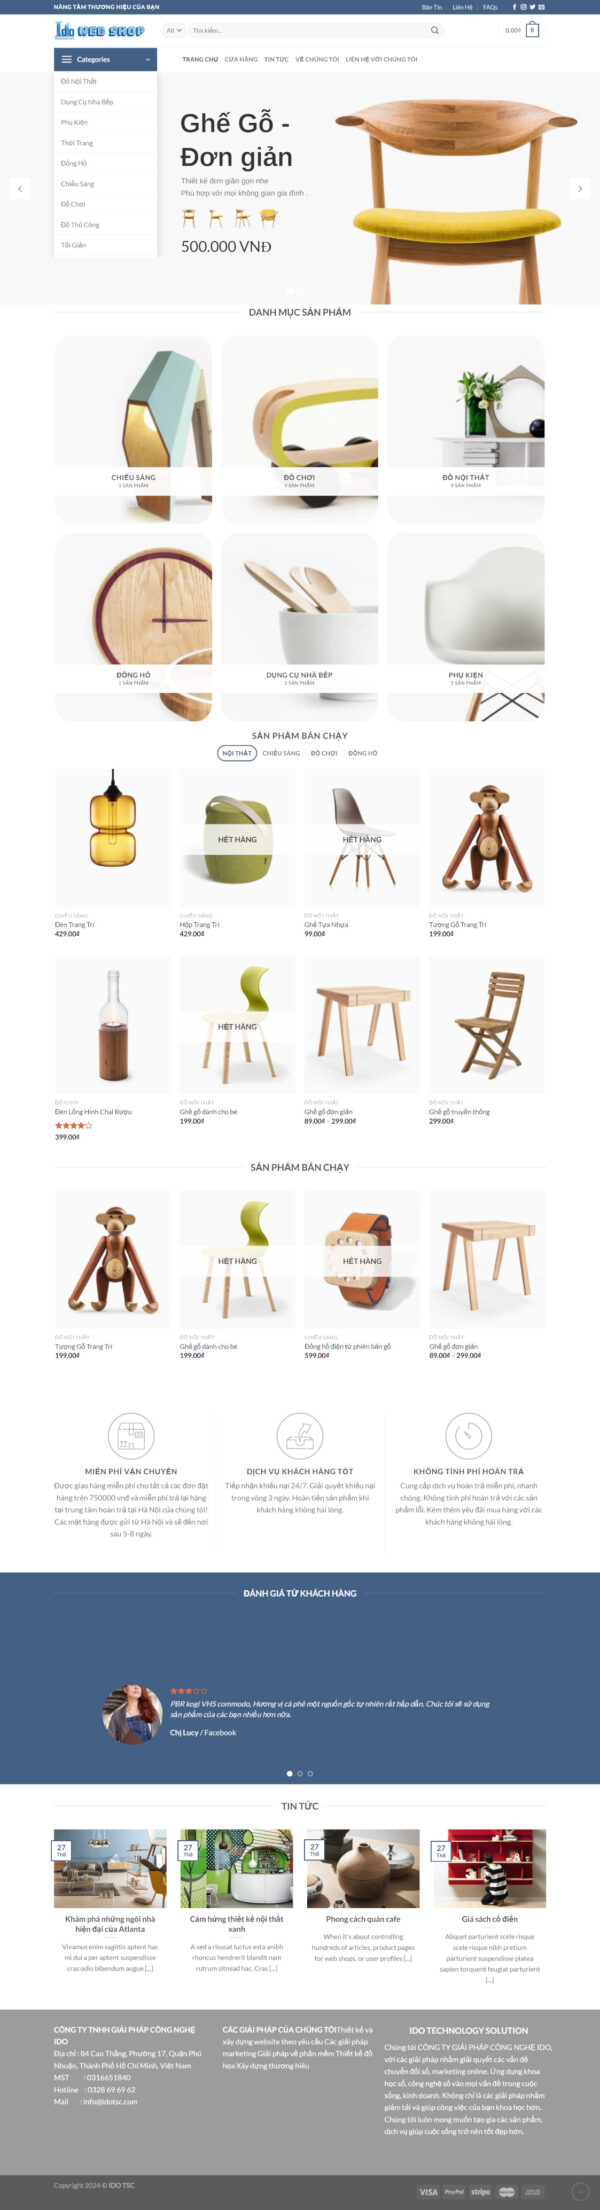 Full home page of website selling furniture